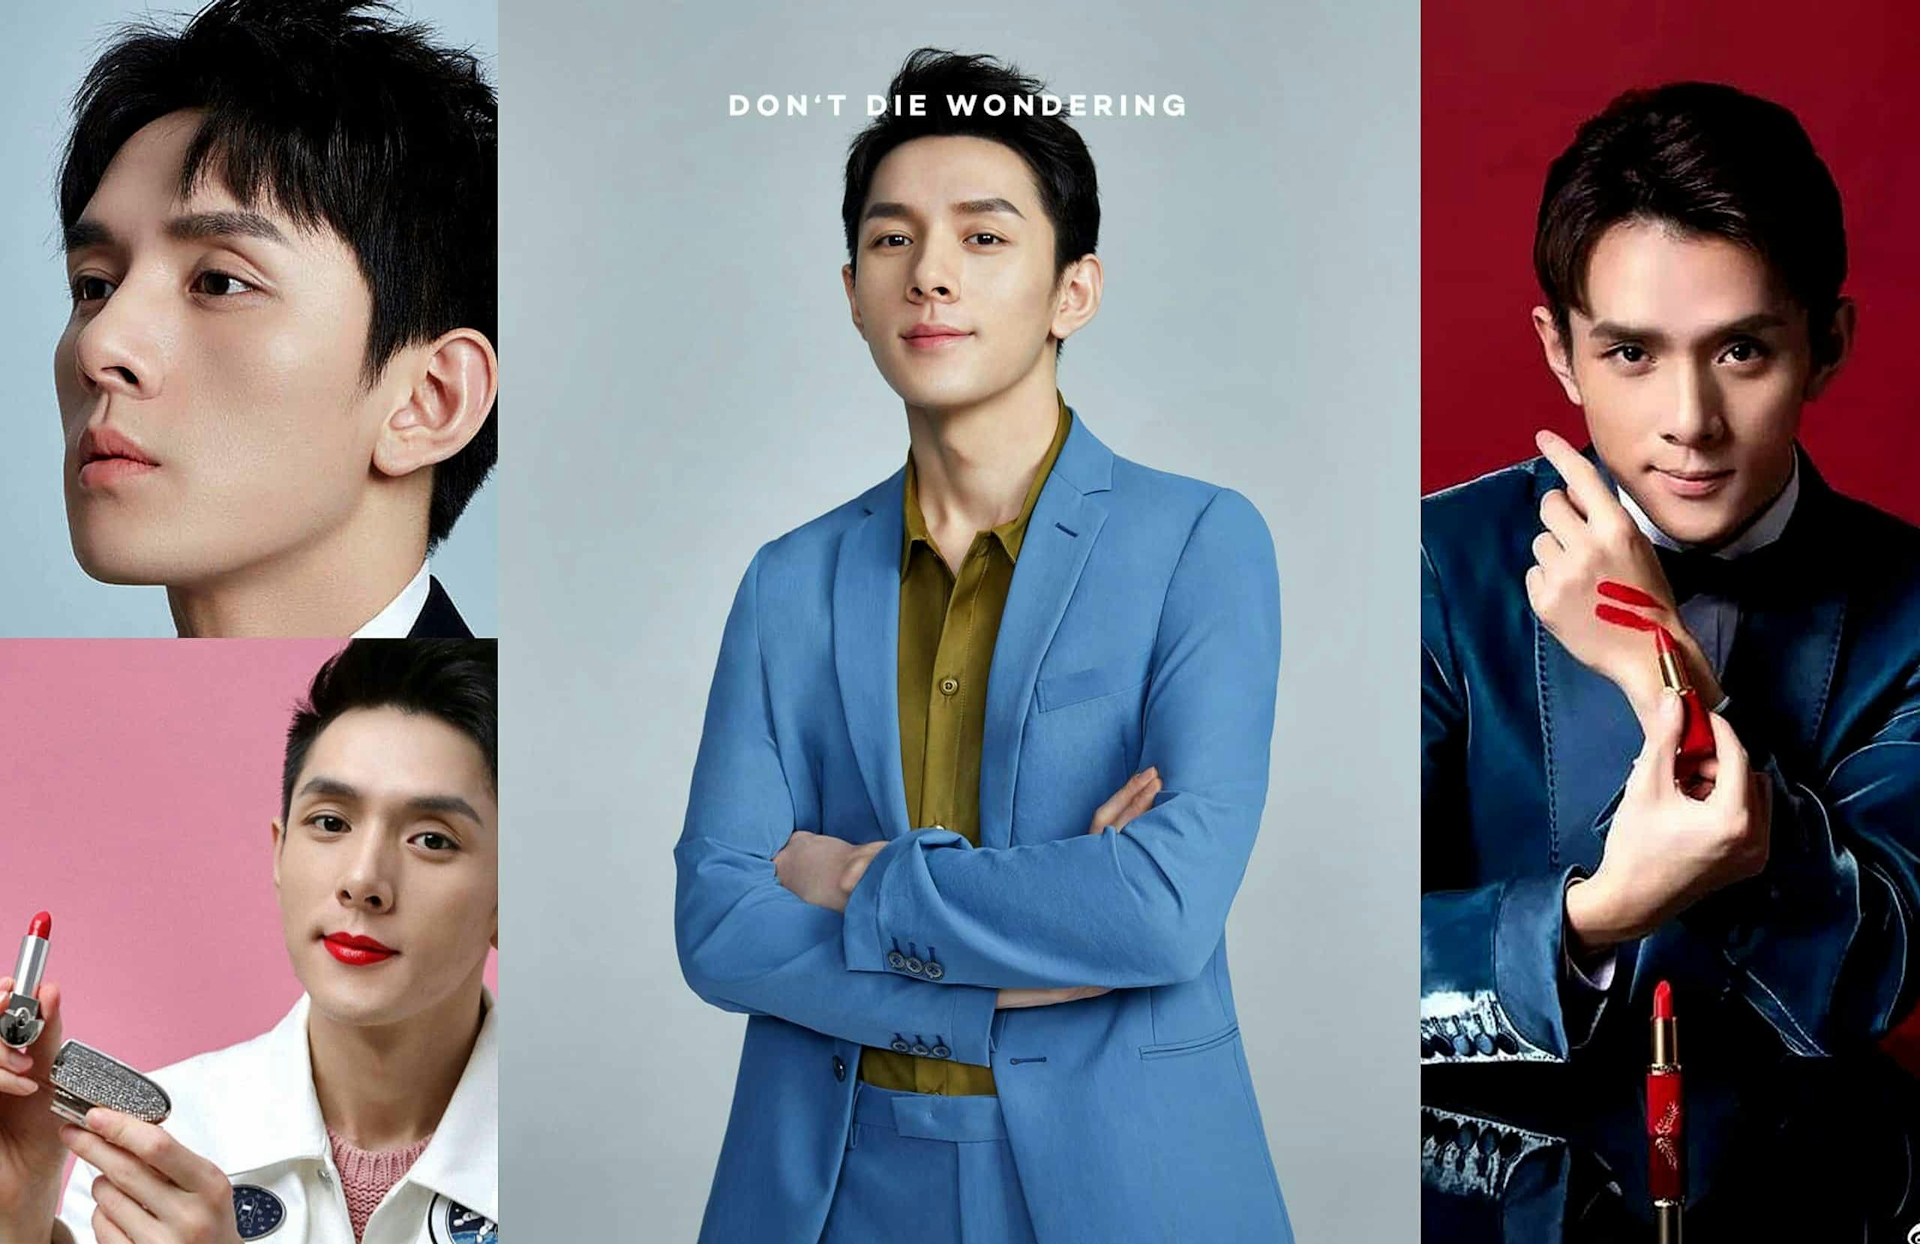 The Lipstick King – China’s Biggest Influencer